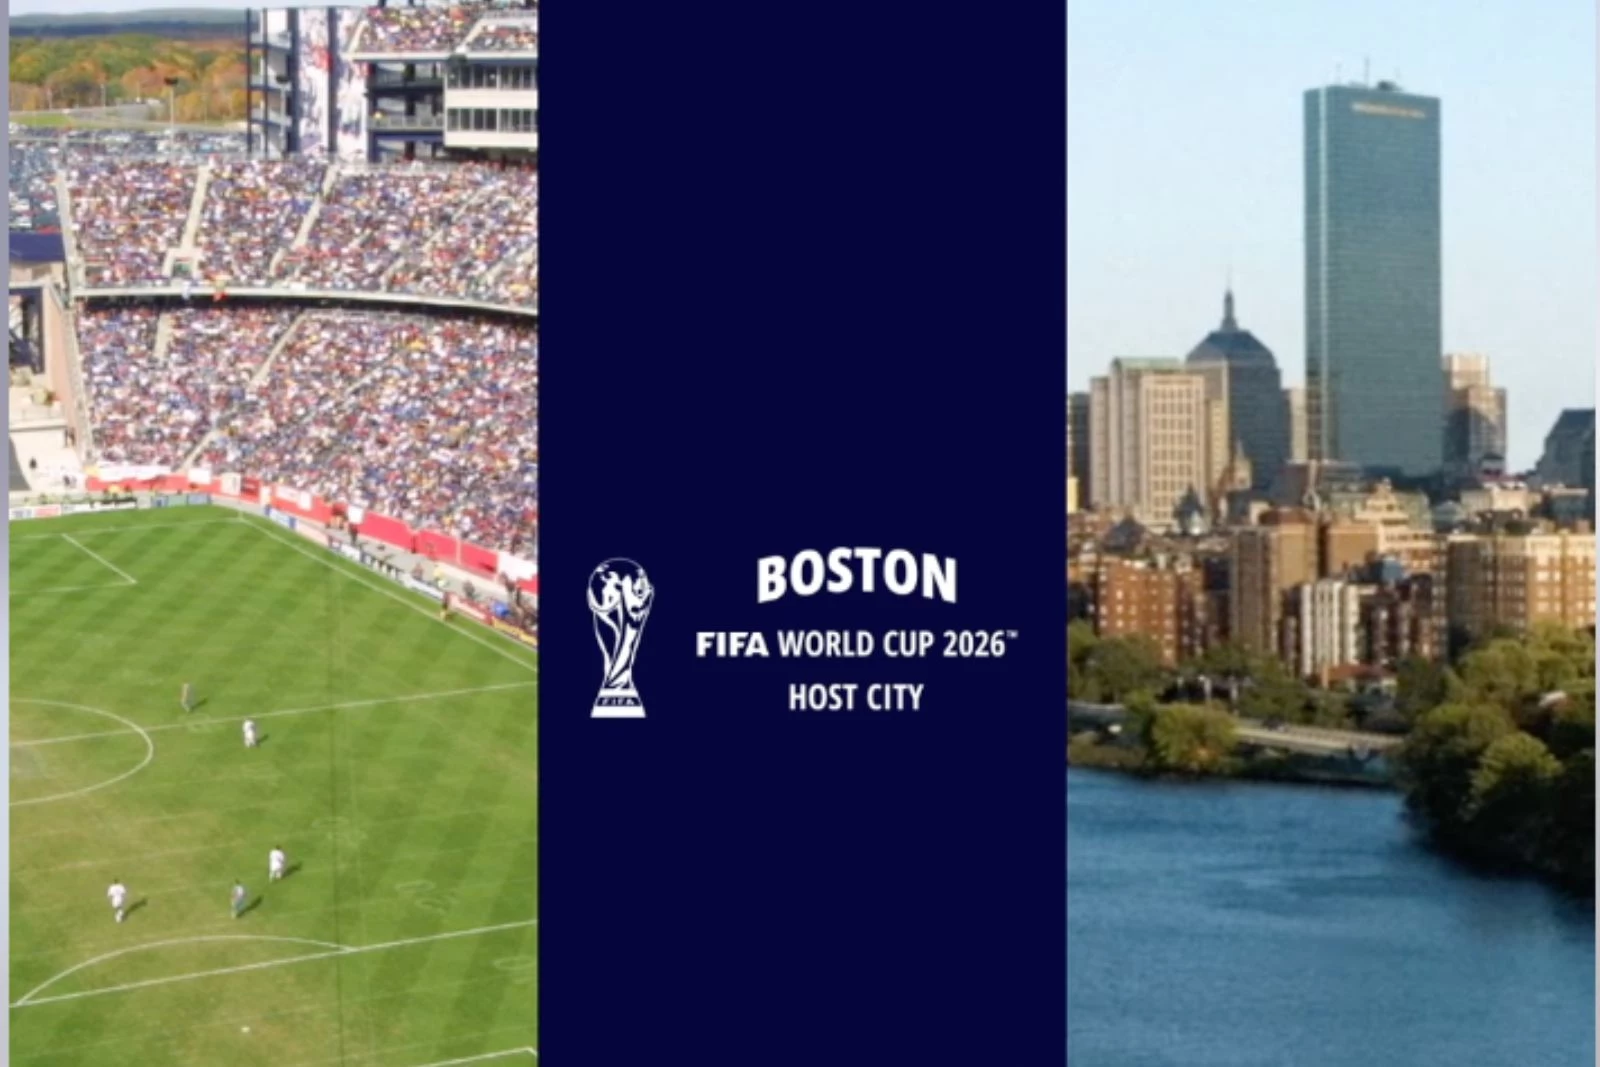 Revs and Boston Soccer 2026 invite fans to USA vs. England FIFA World Cup  Qatar 2022 Watch Party at Royale Boston